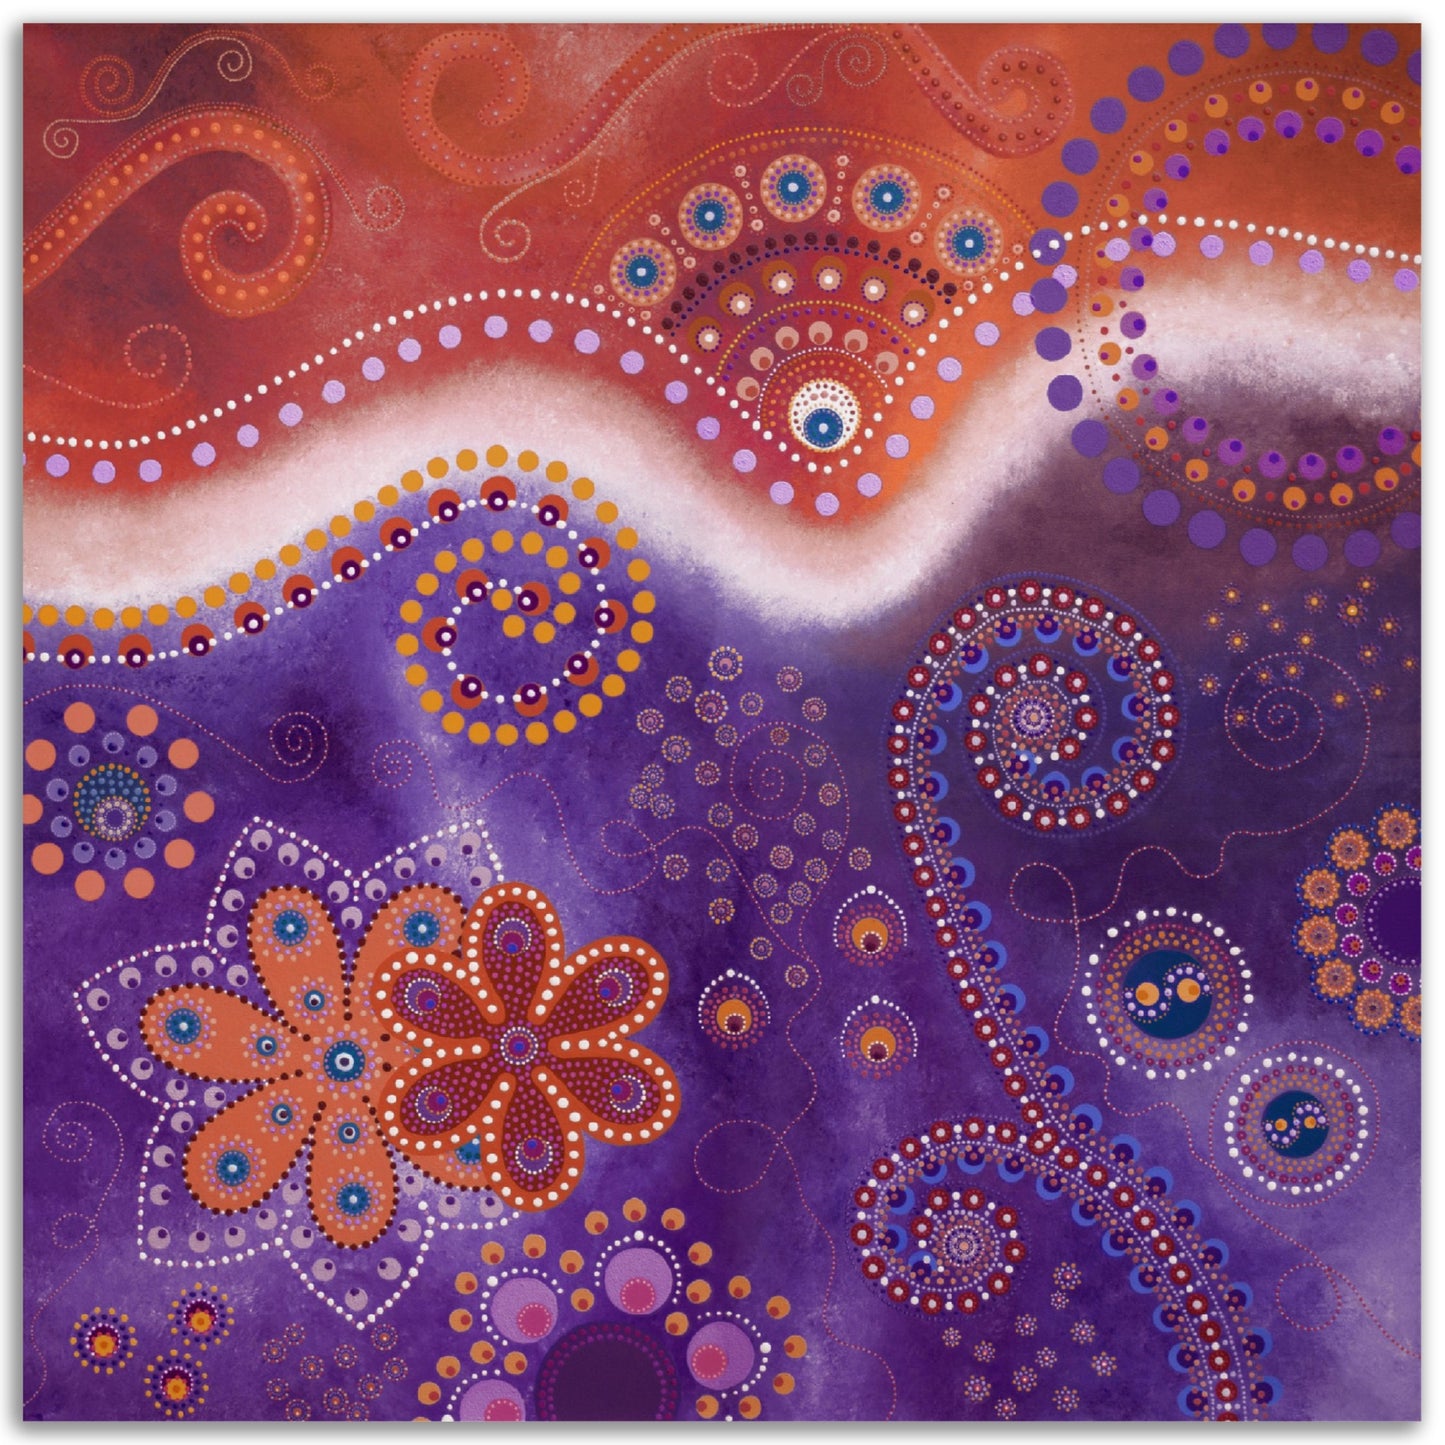 "The Happiness inside" - Orange and purple - by Fanny Fay Engström